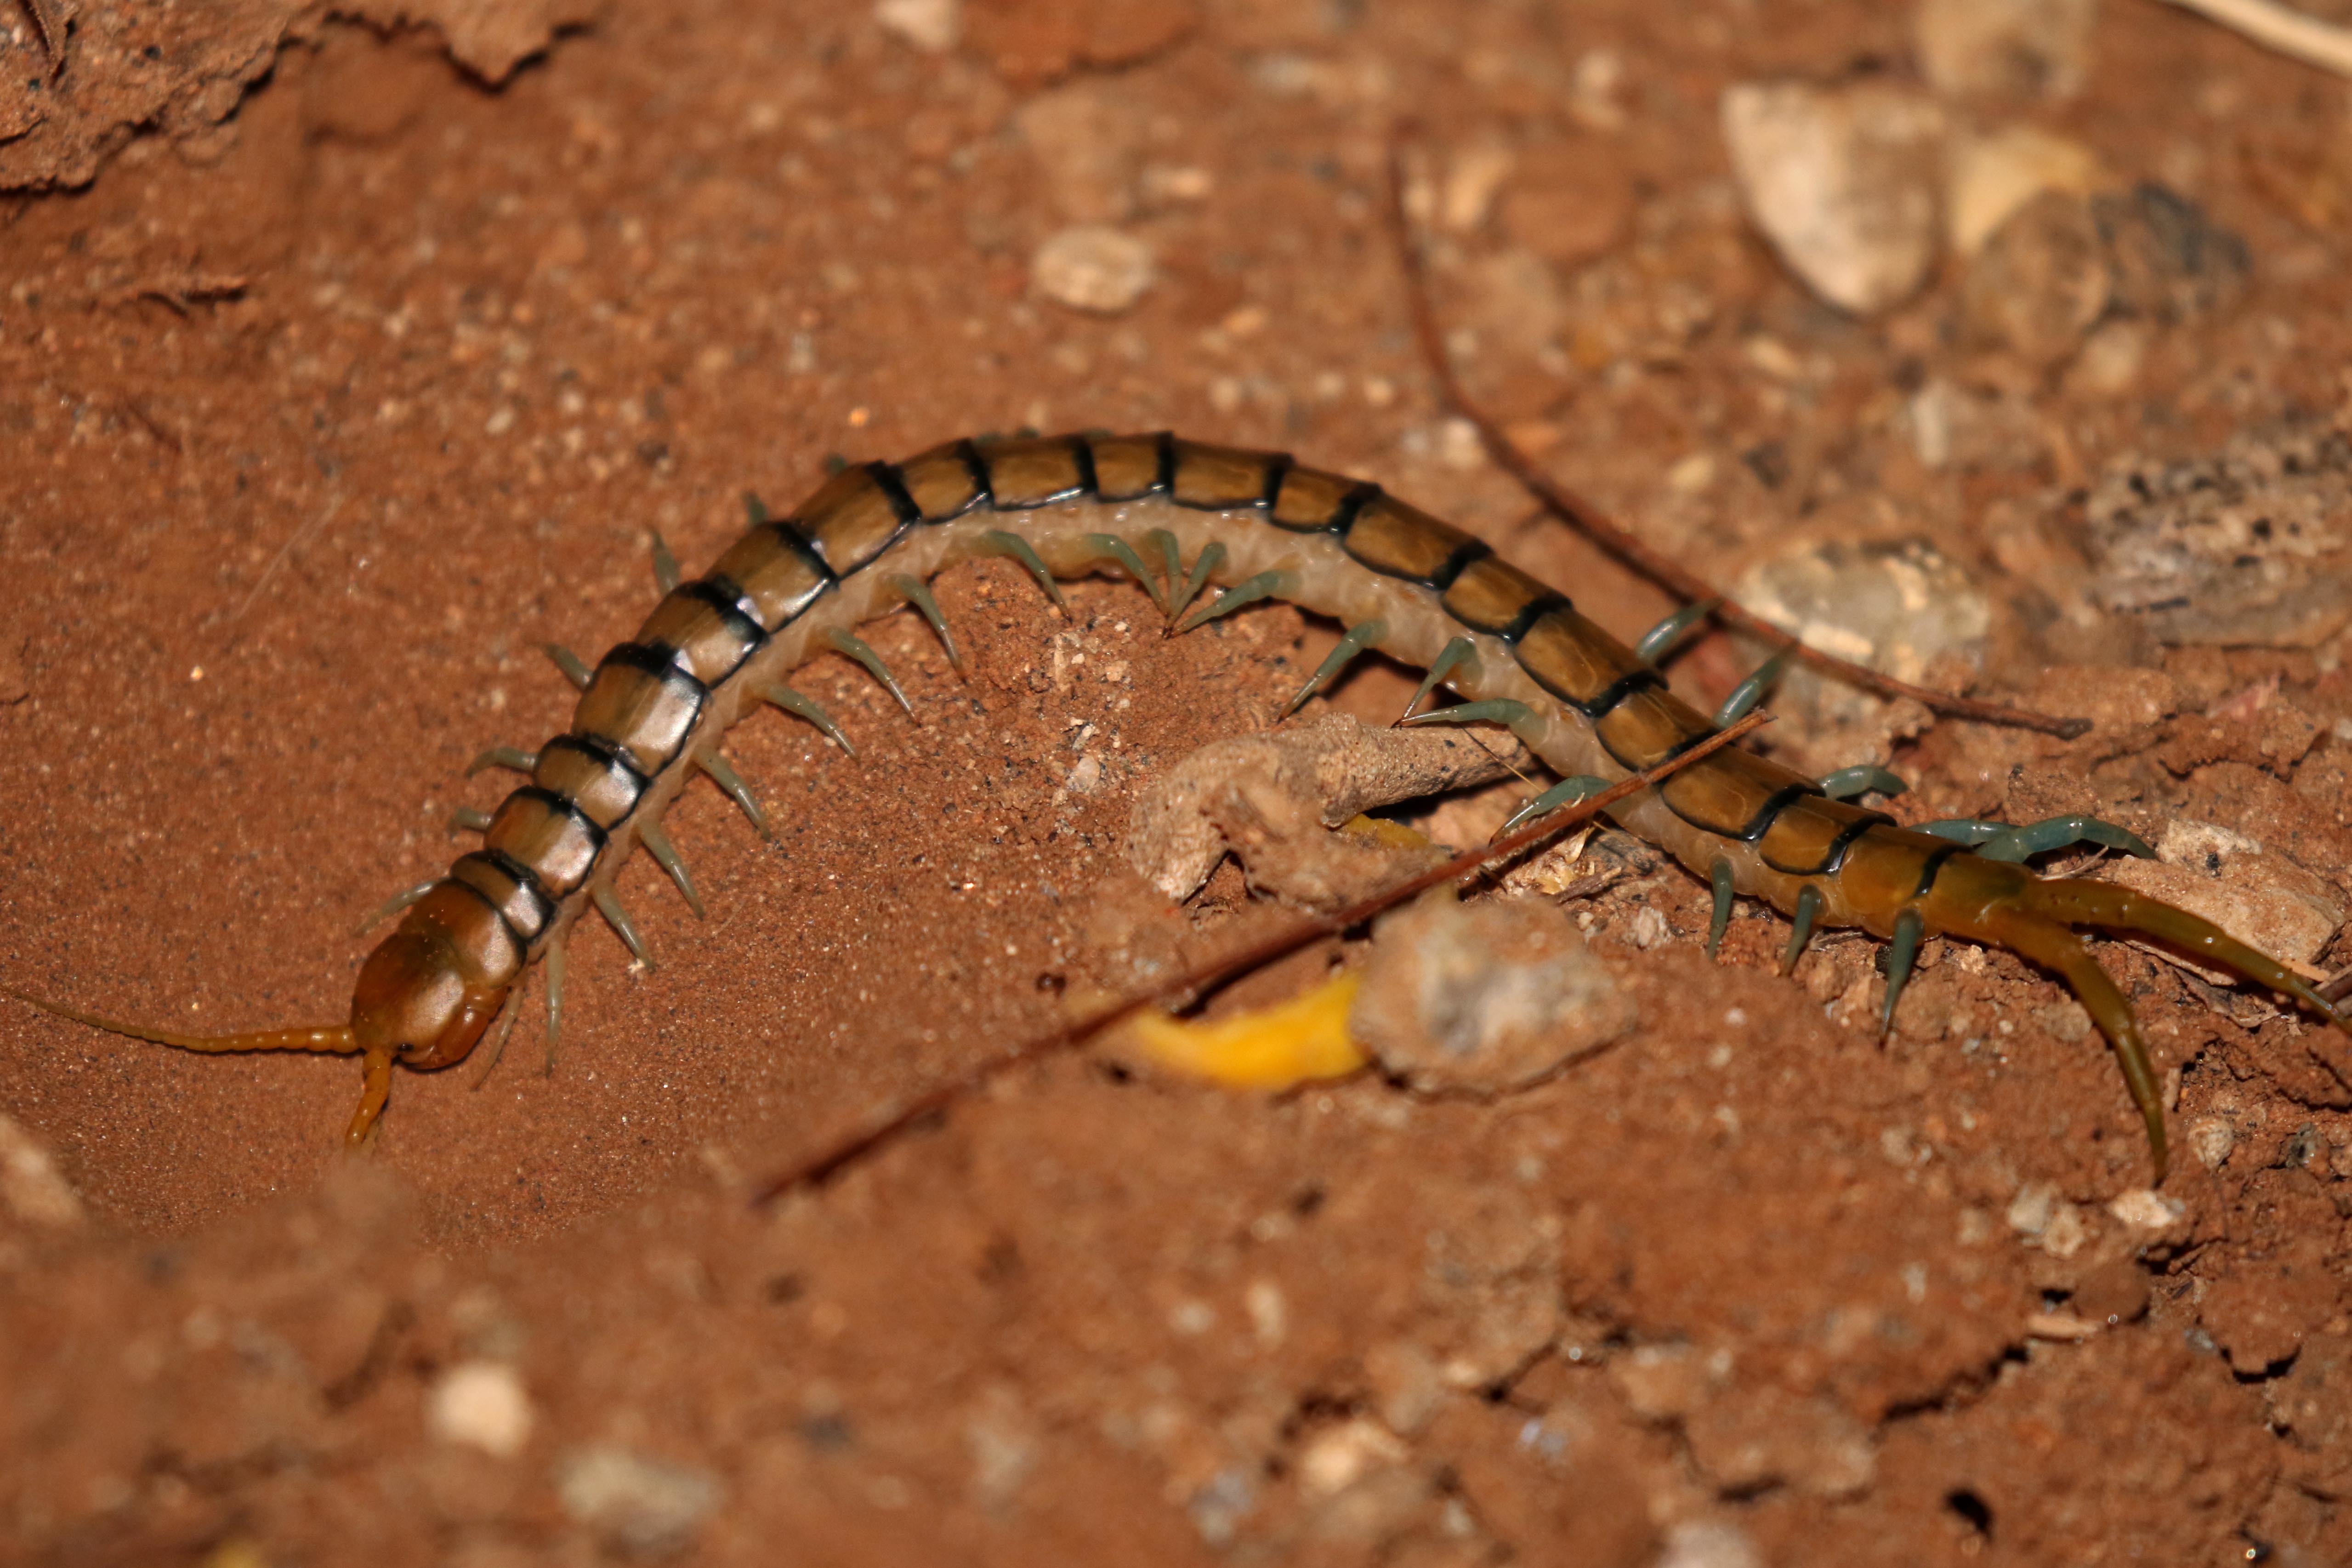 Image of red-headed centipede